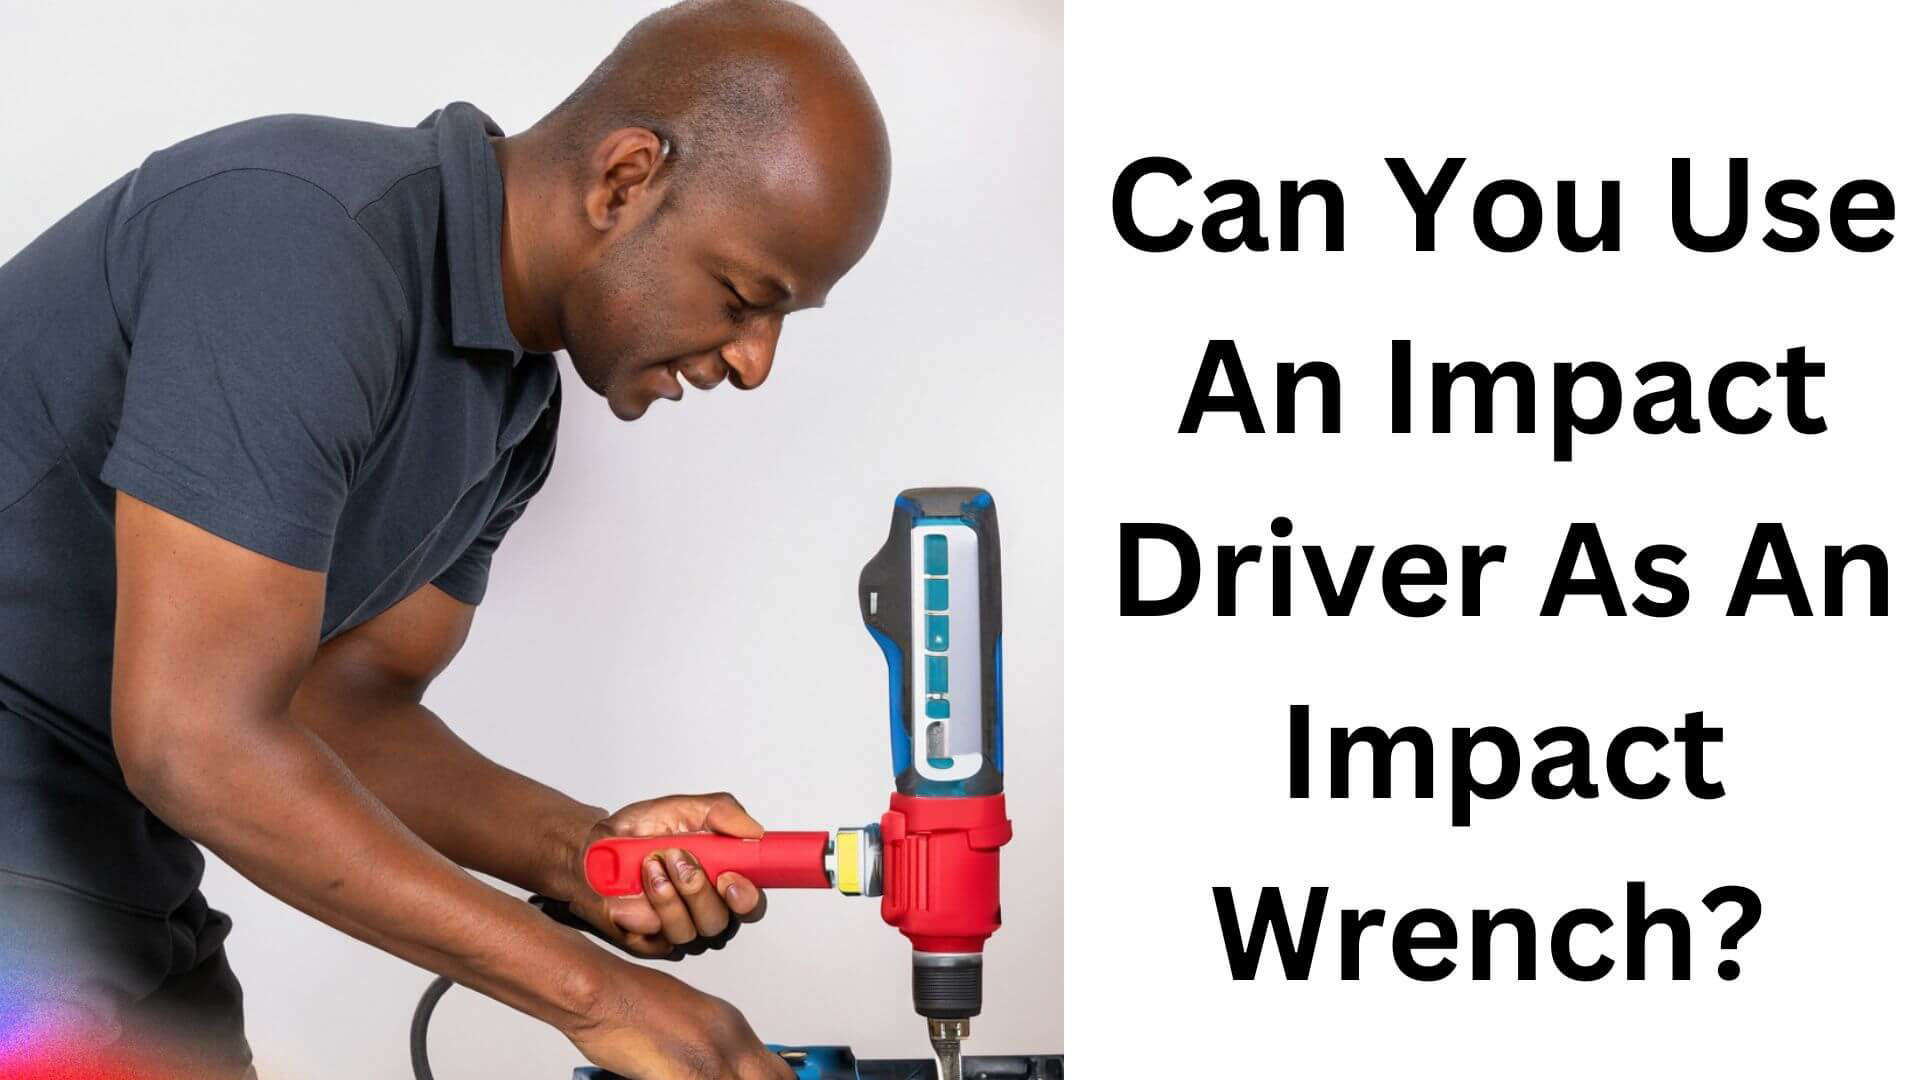 Can You Use An Impact Driver As An Impact Wrench?